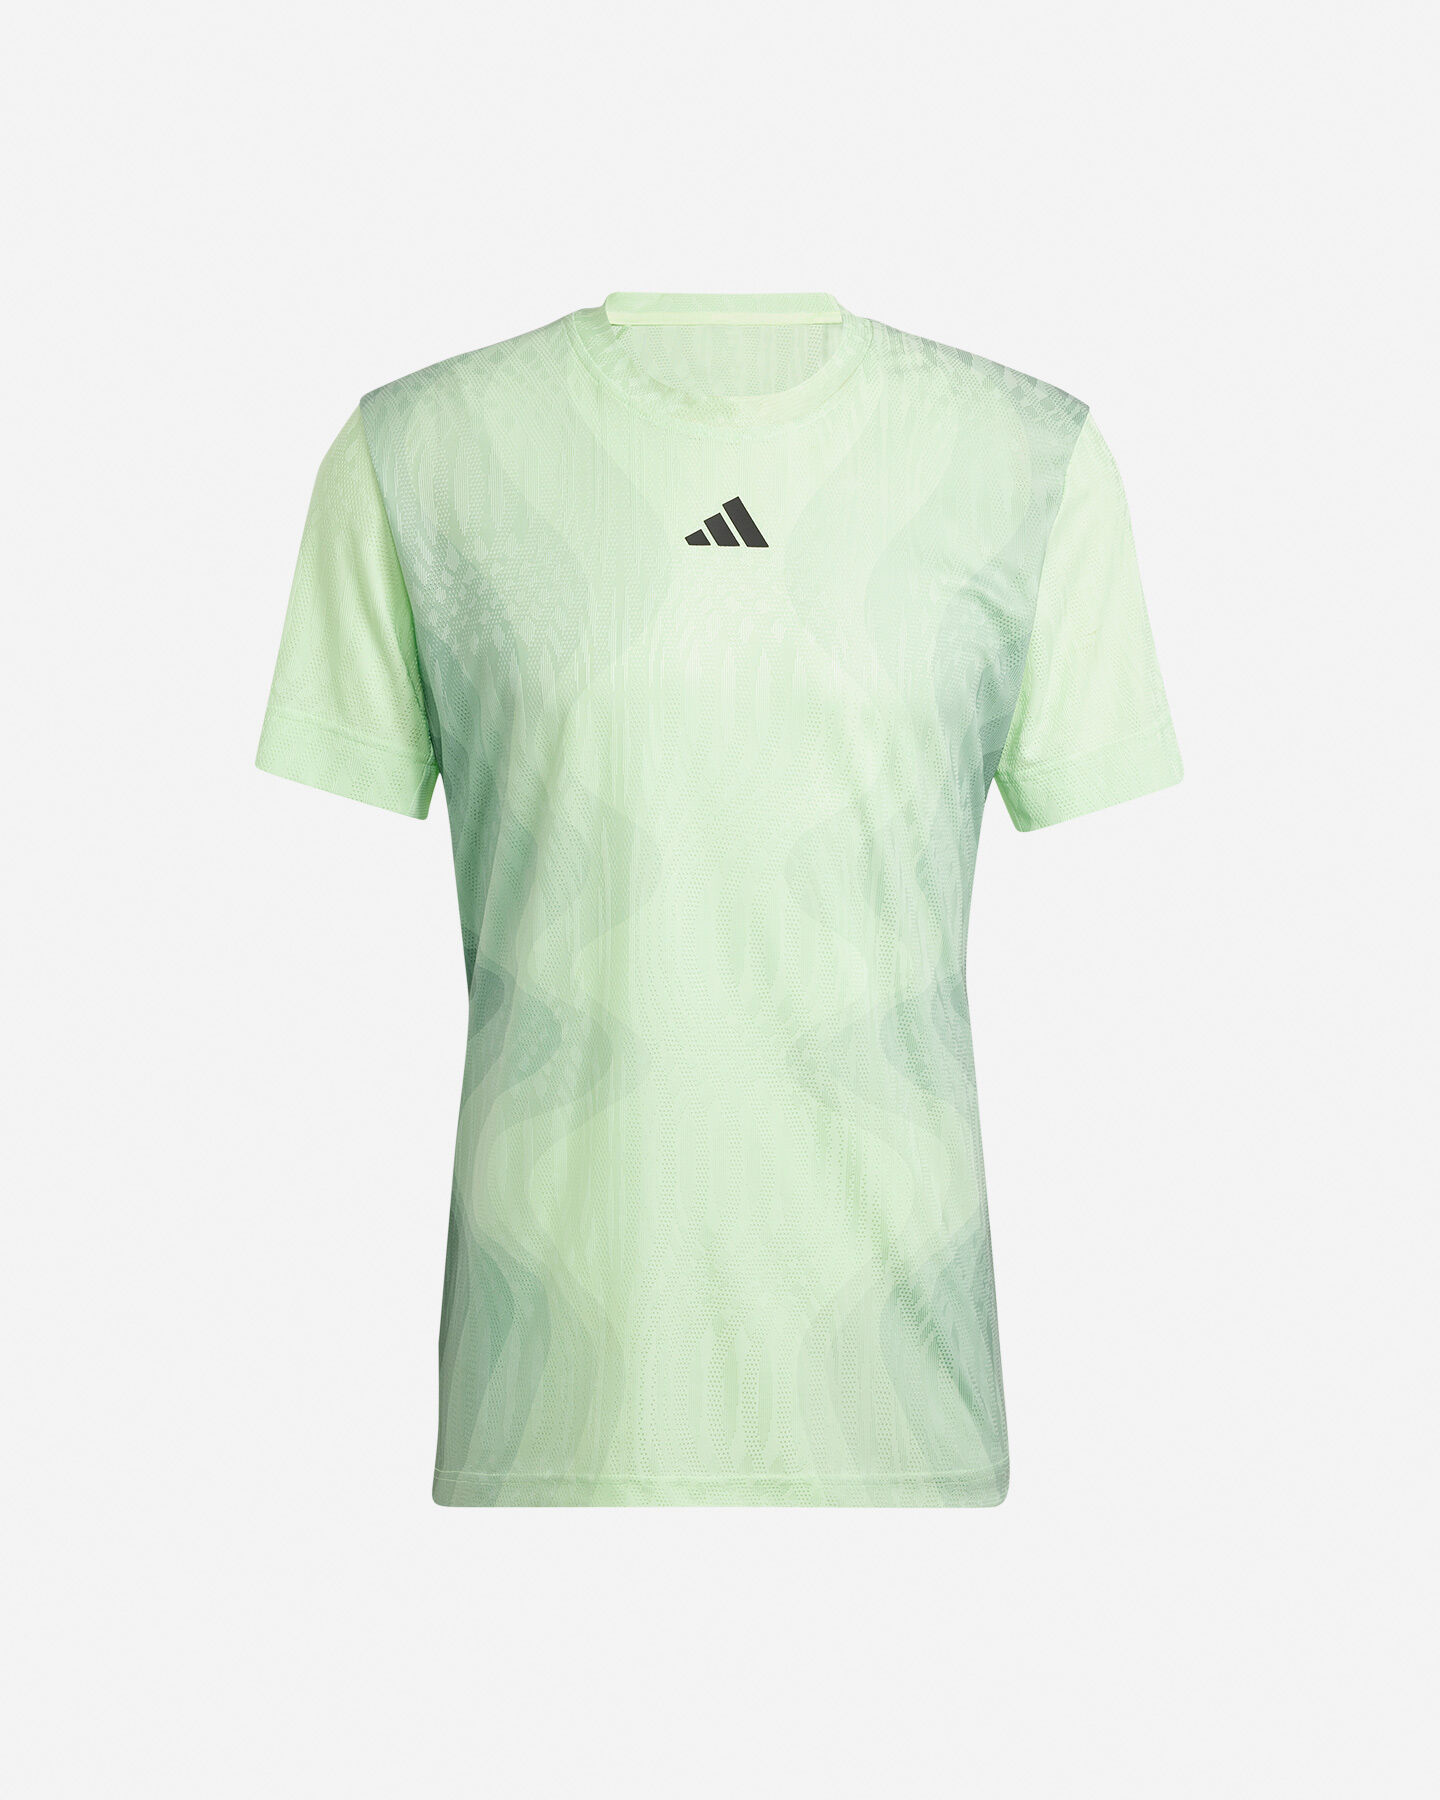  T-Shirt tennis ADIDAS AO23 AUGER M S5690179|UNI|S scatto 0